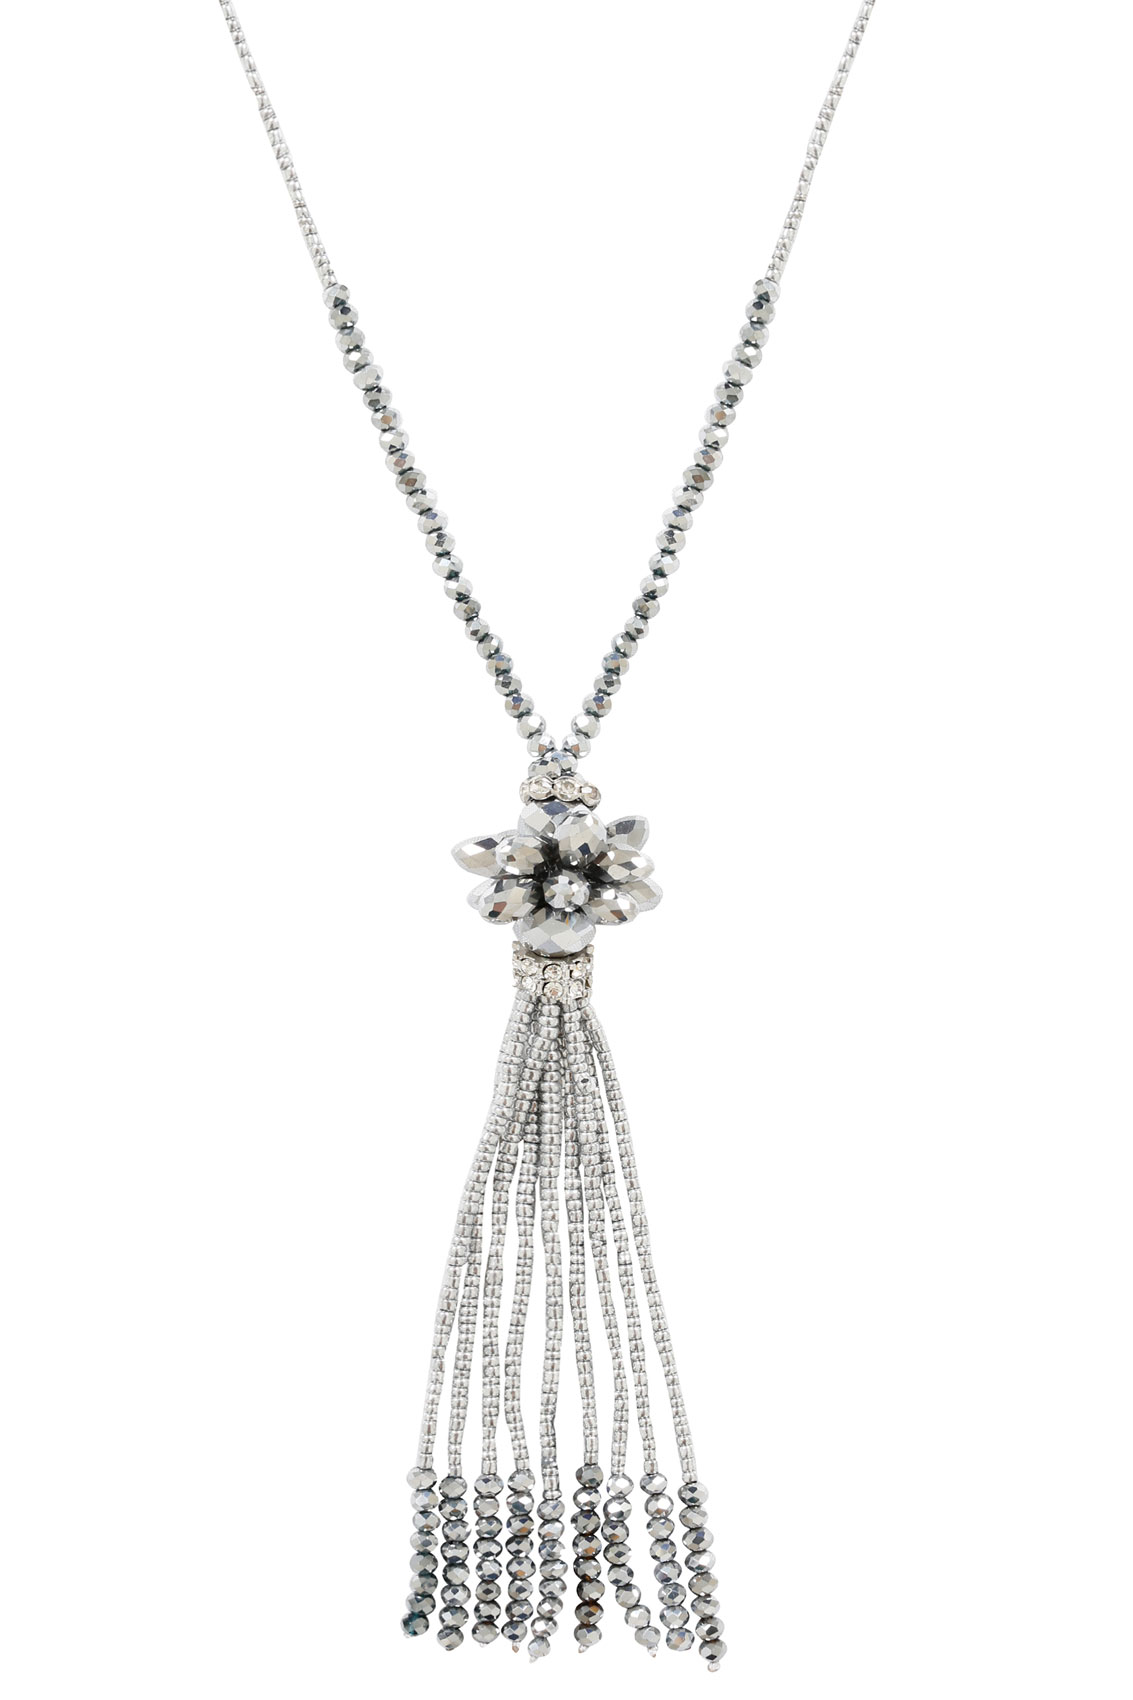 Silver Long Necklace With Cluster Tassel Pendant